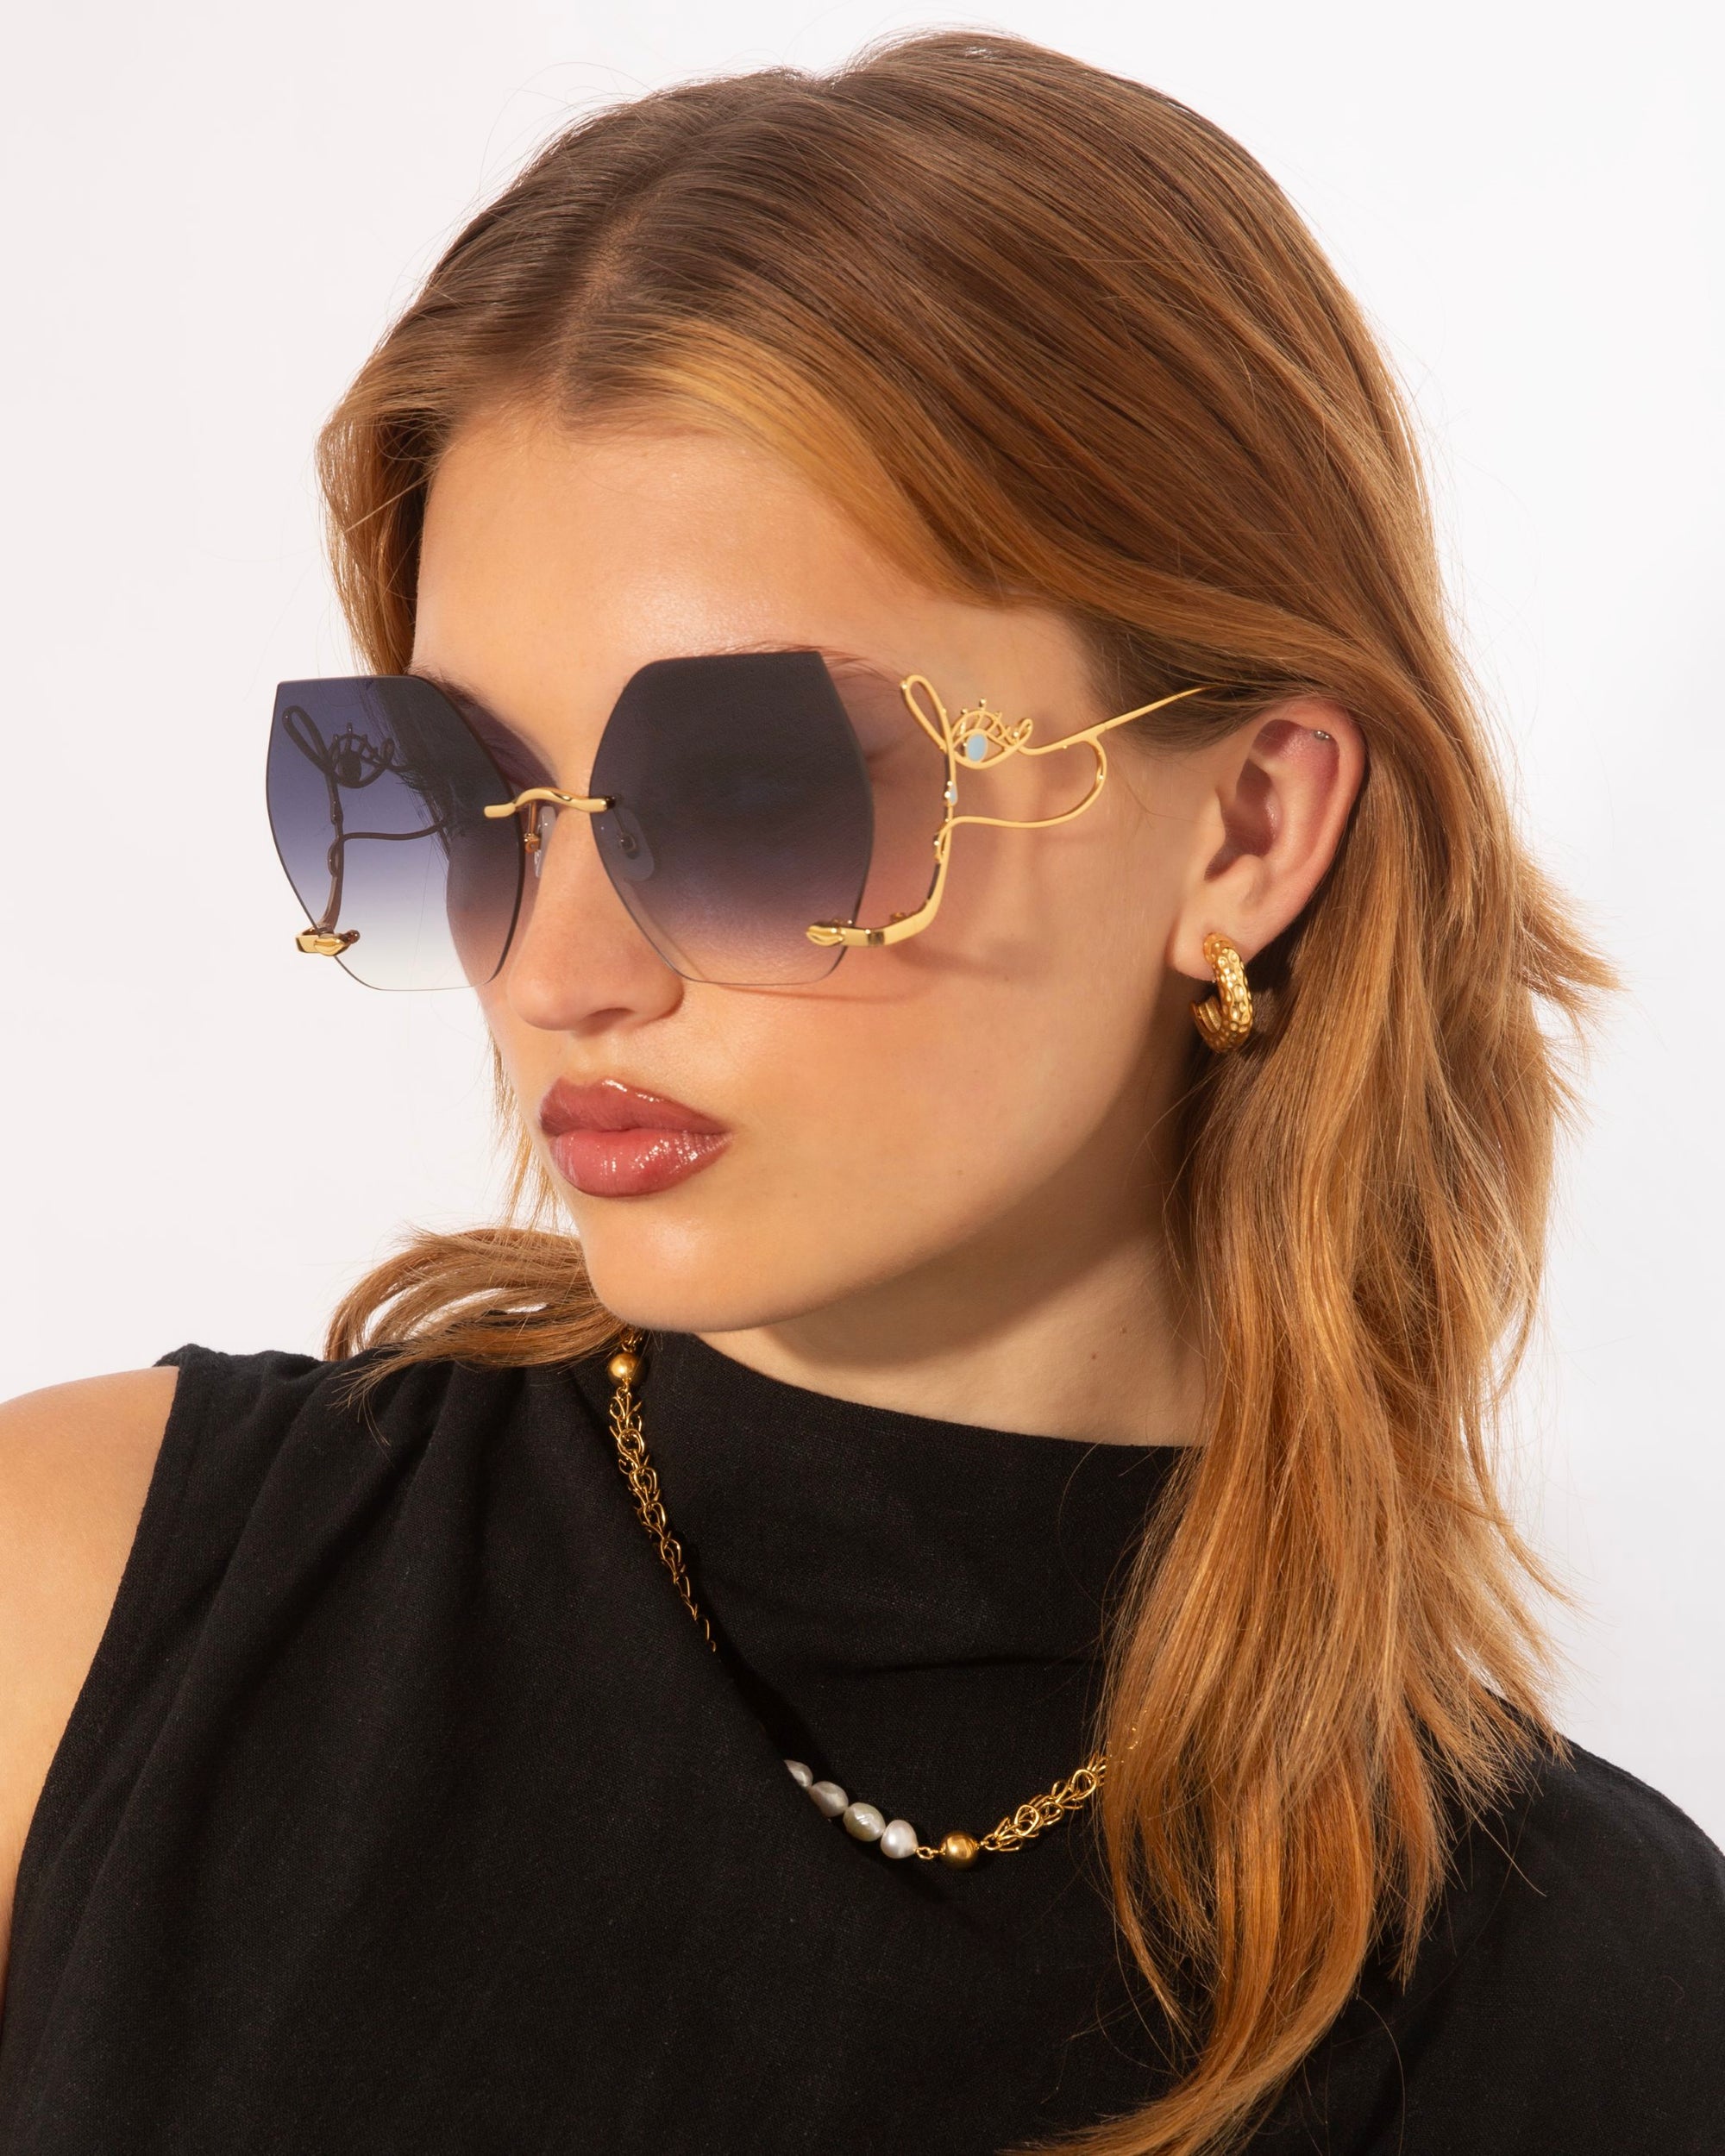 A woman with light brown hair wears oversized, gradient Cry Me a River sunglasses with gold detailing. She is dressed in a black top and accessorizes with hoop earrings and a gold chain necklace. Like Julie London&#39;s song, this limited edition style by For Art&#39;s Sake® exudes timeless elegance as she looks to her left against a plain white background.